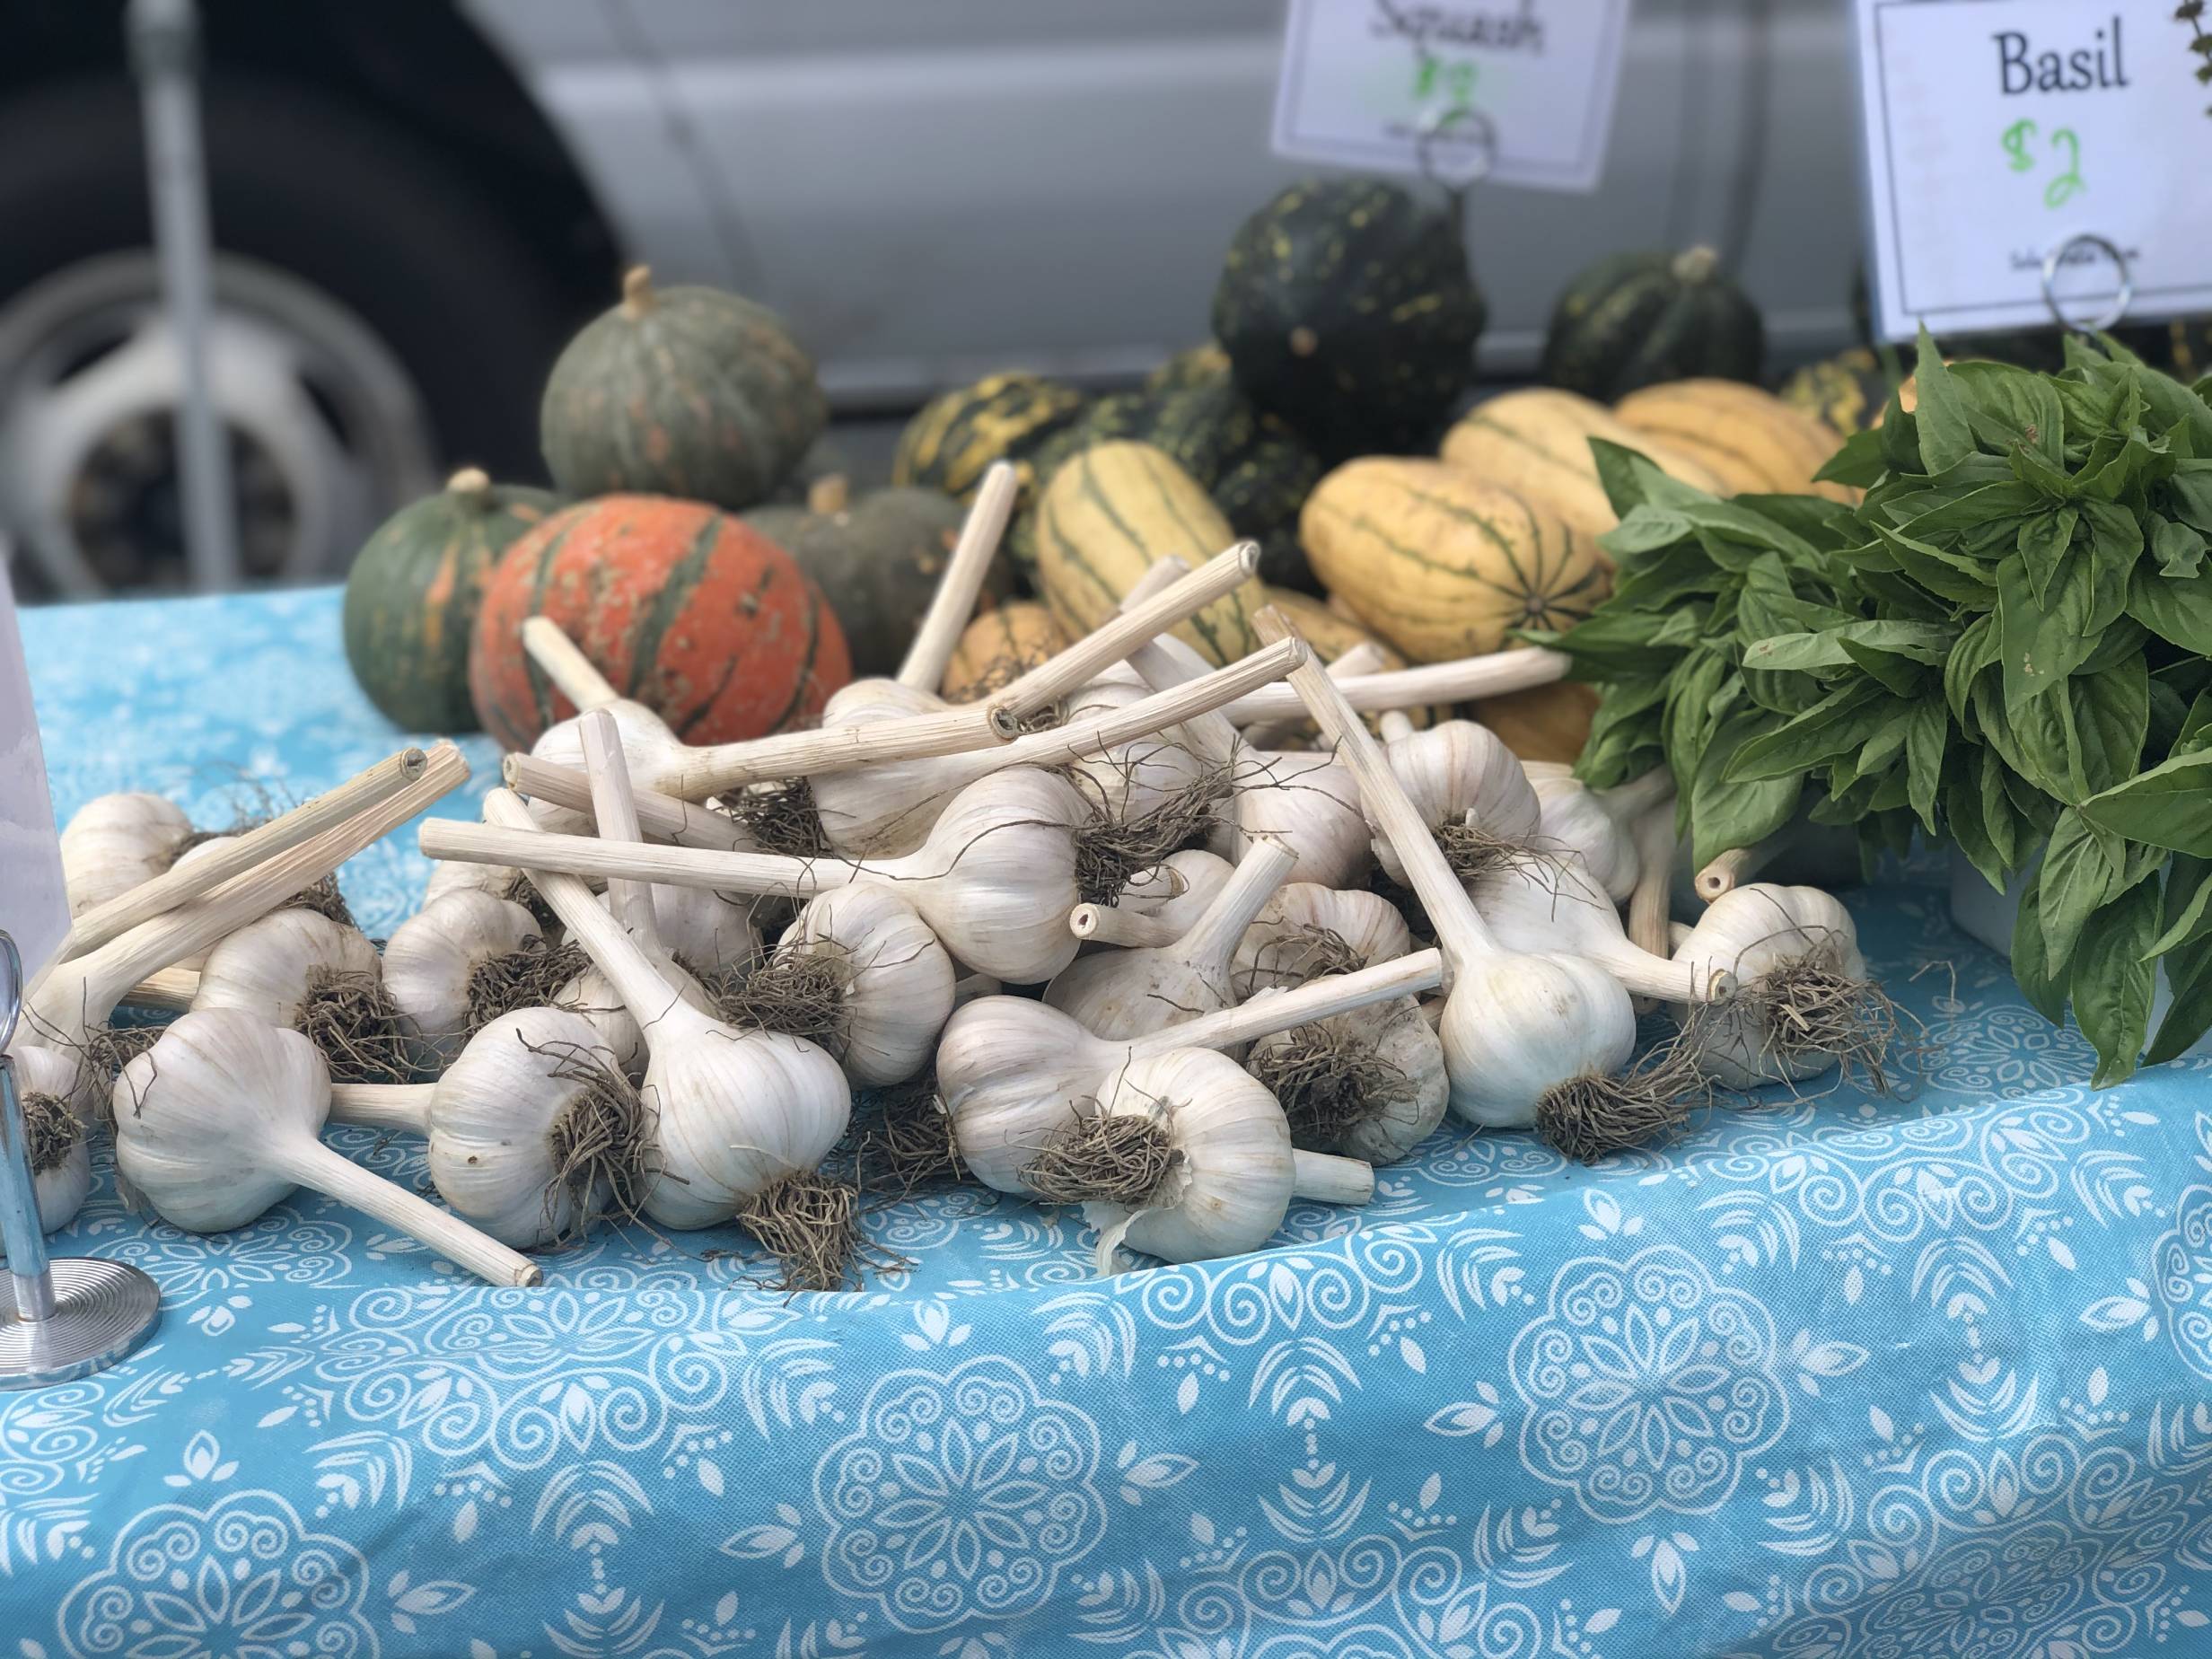 Many garlics sit on a table in a pile next to other produce on a table with a blue tablecloth. Photo by Alyssa Buckley.